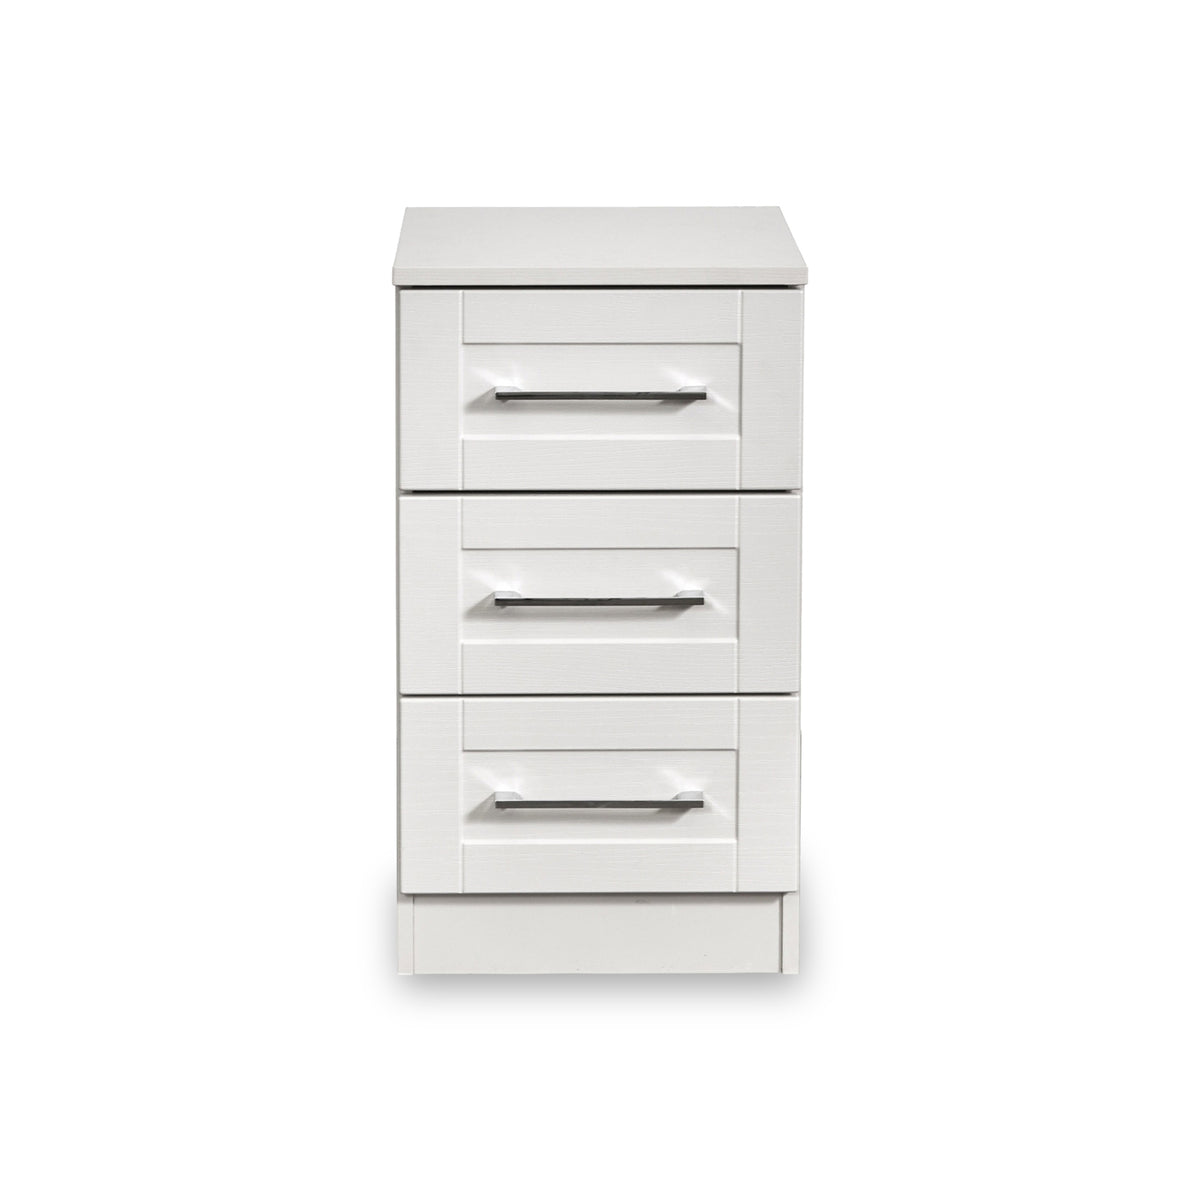 Bellamy White wireless charging 3 drawer bedside table from Roseland Furniture